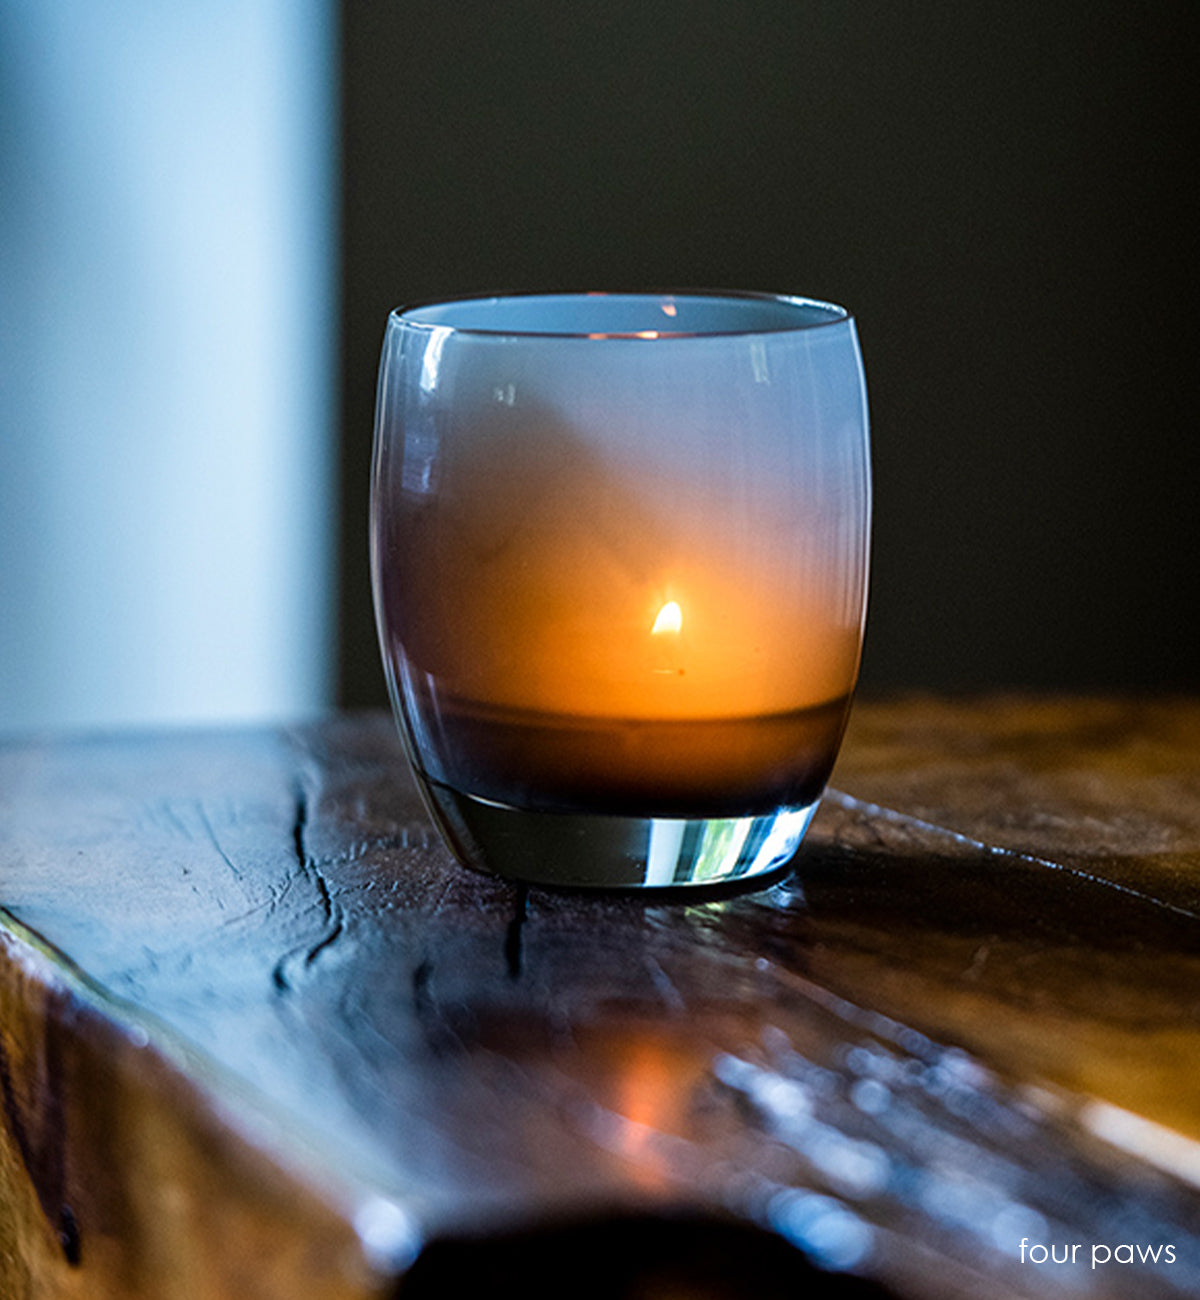 four paws smokey gray hand-blown glass votive candle holder.